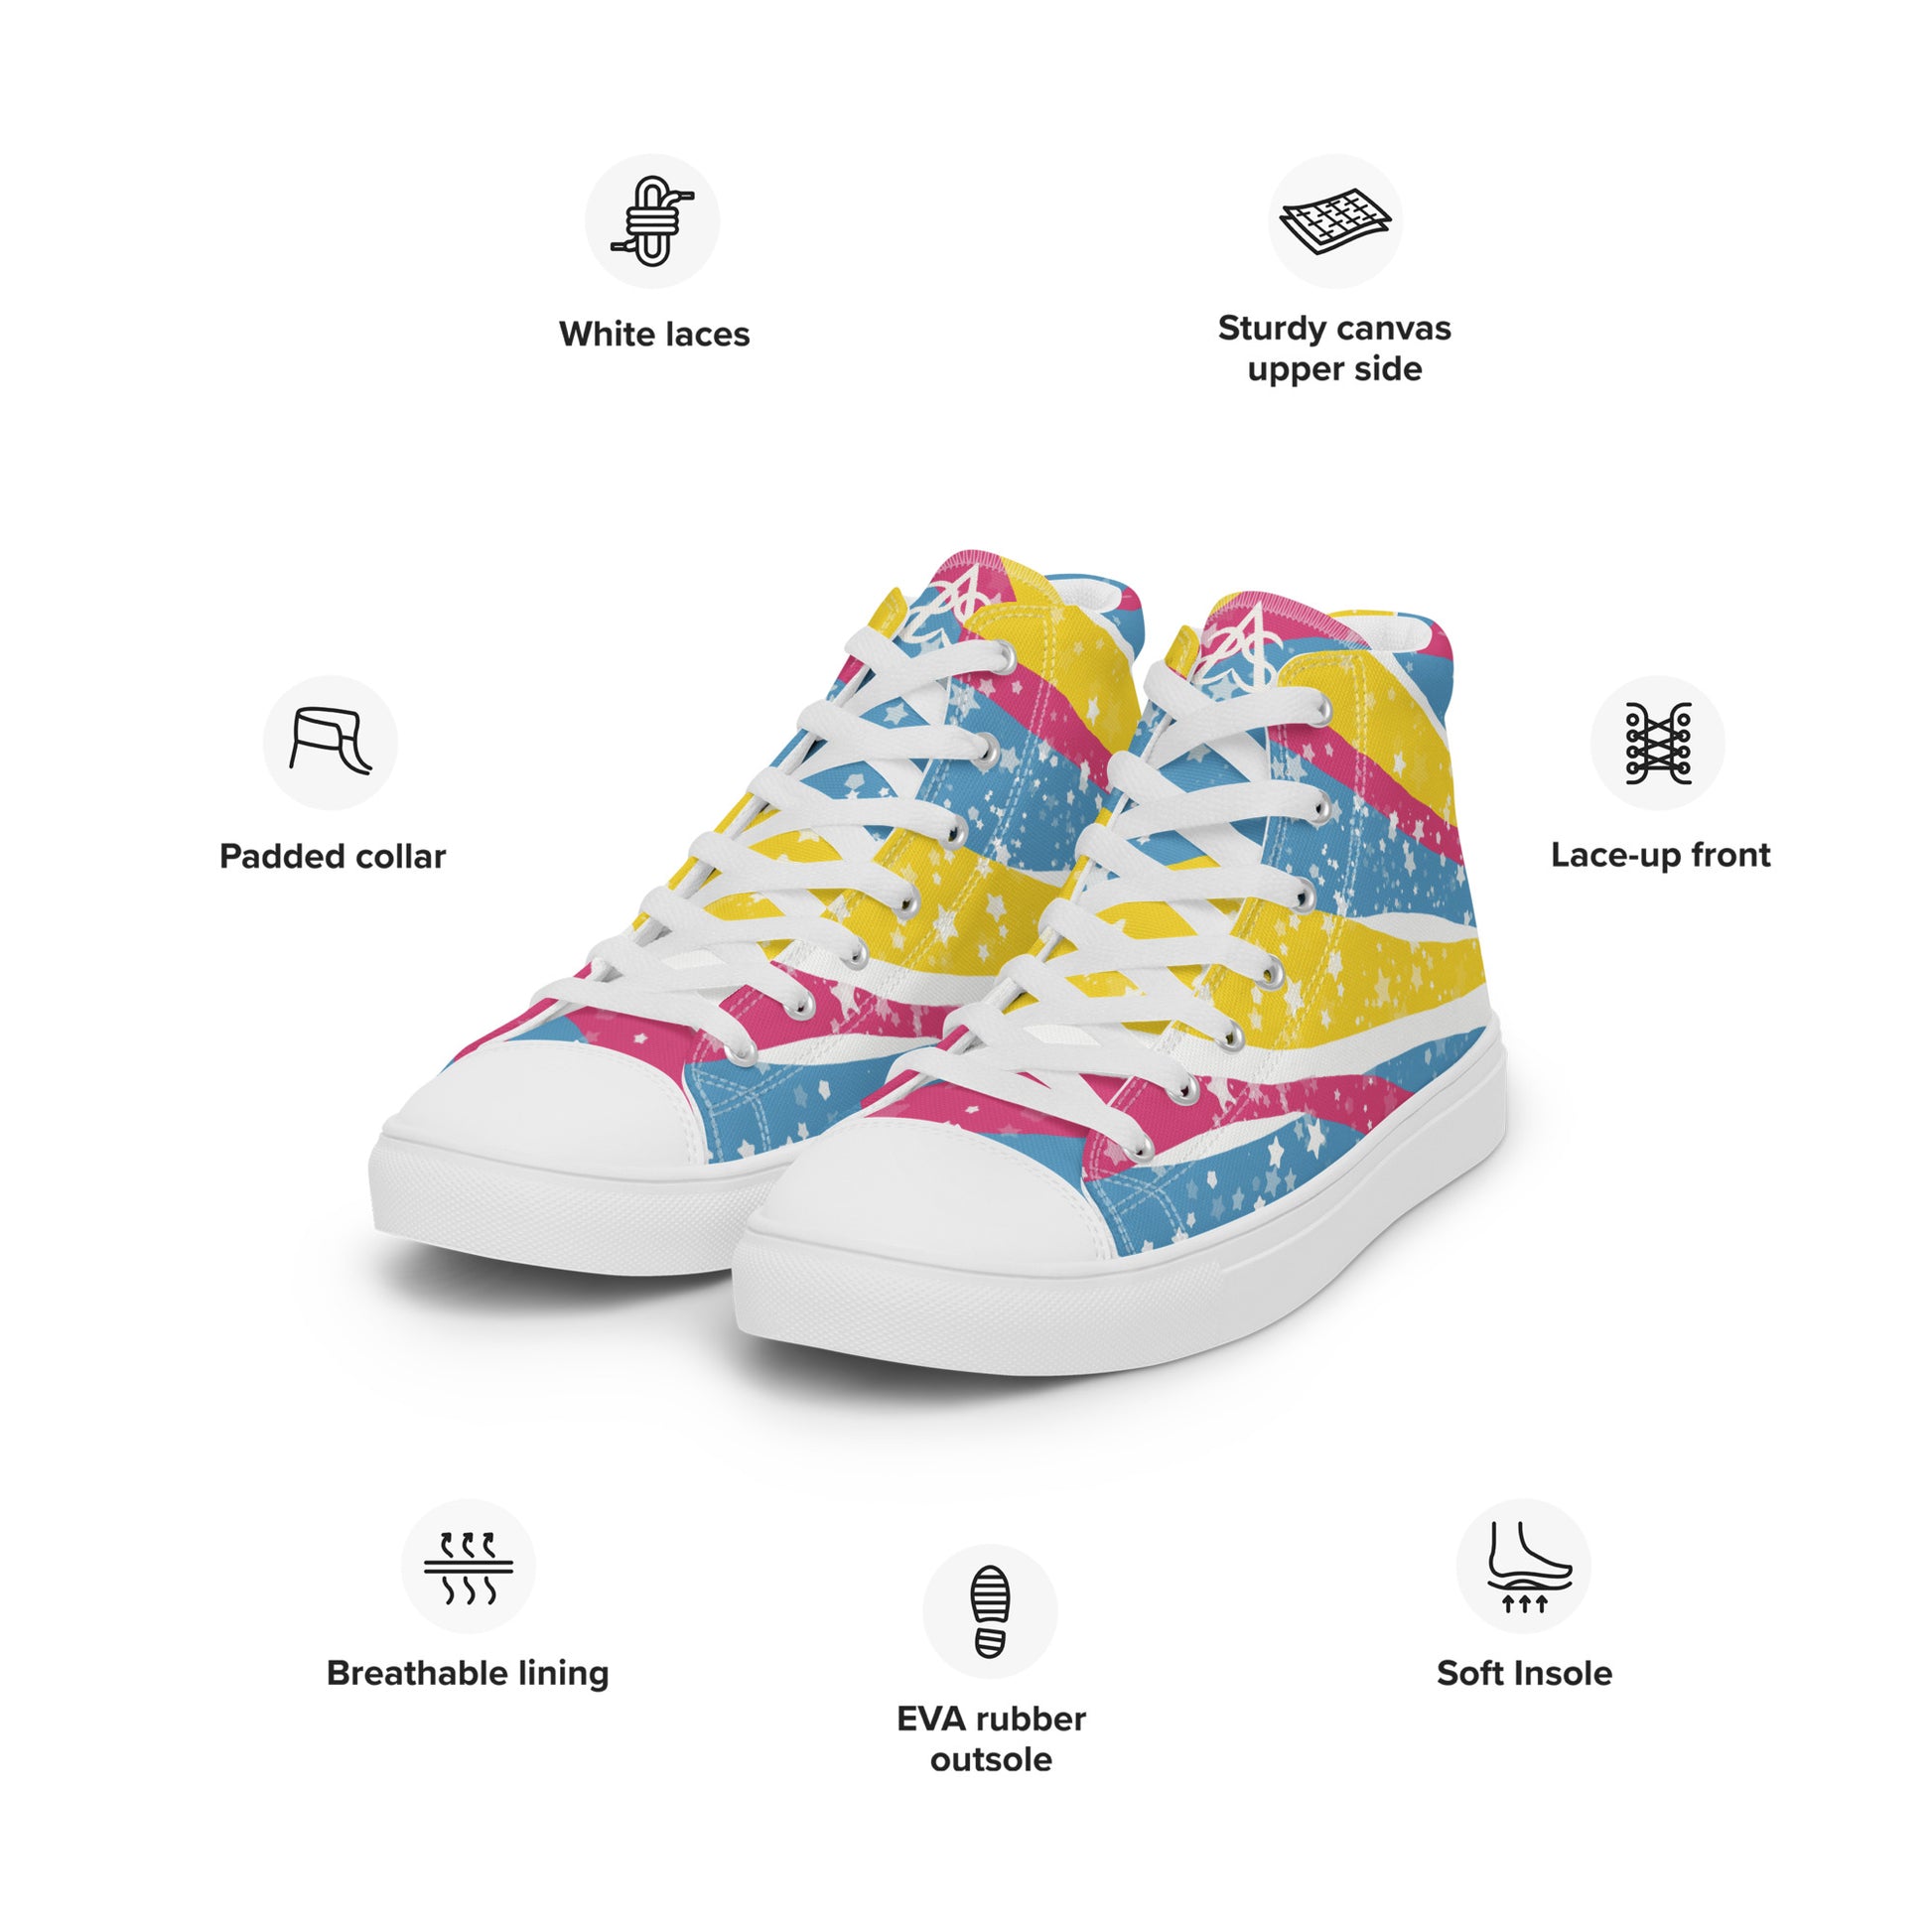 Product features surround the Starry Pansexual high top shoes by Aras Sivad: Padded collar, white laces, sturdy canvas upper side, lace up front, soft insole, EVA rubber outsole, and breathable lining.